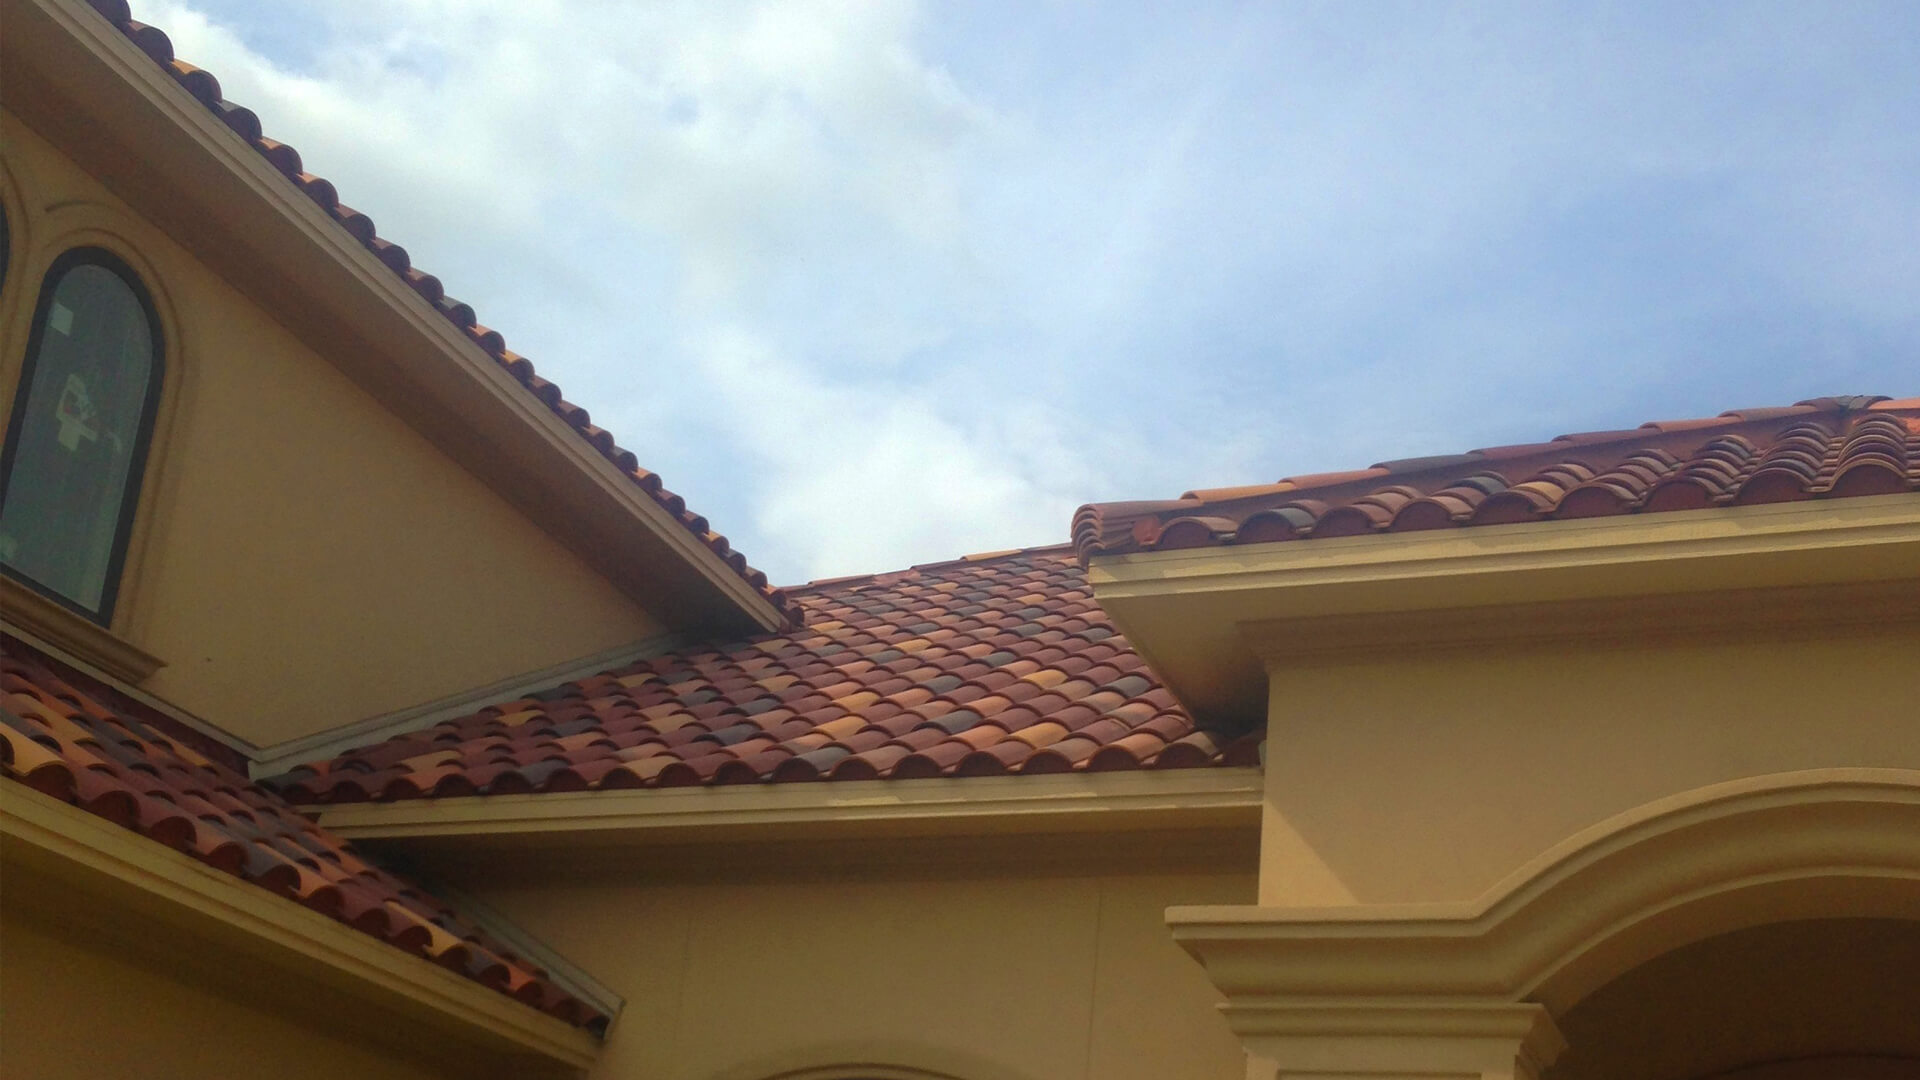 Clay Tiles Can Be Energy Efficient!